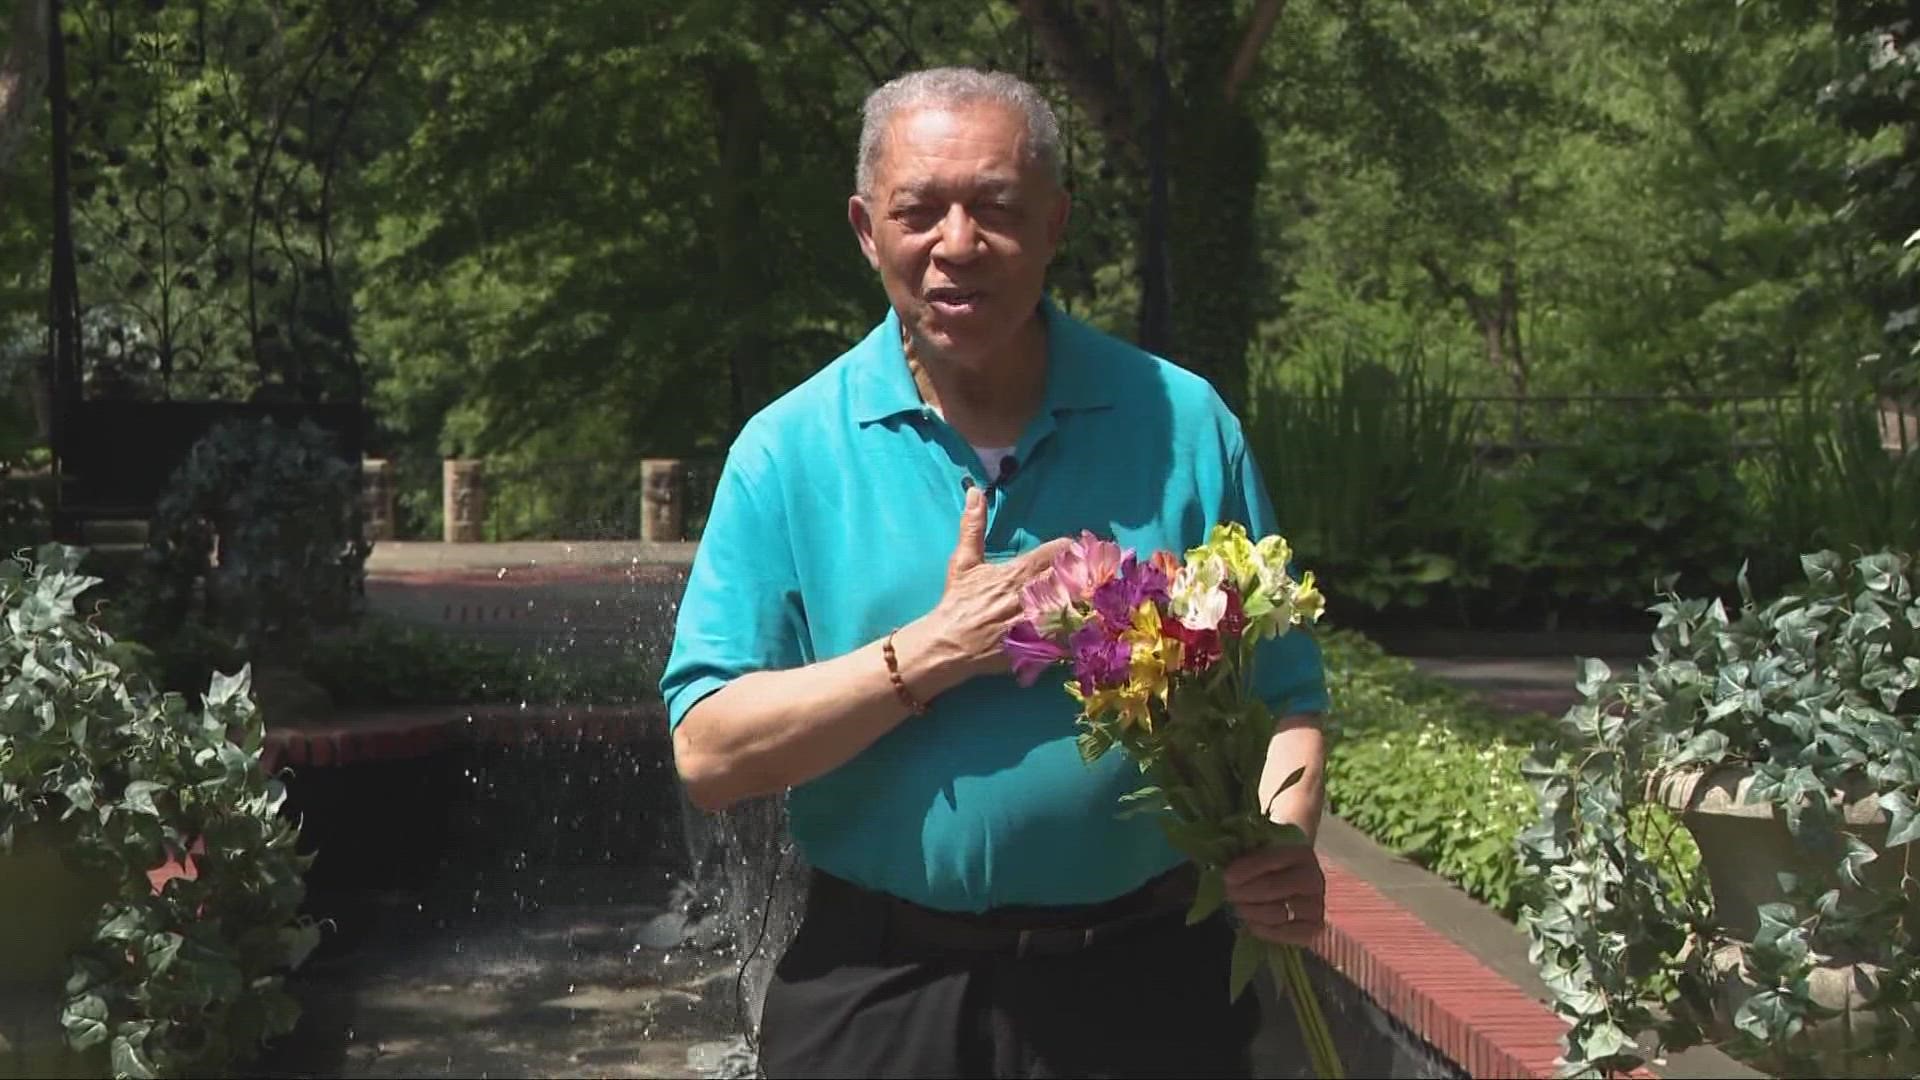 Ahead of Father's Day, WKYC Senior Commentator Leon Bibb shares a poem he wrote in 1982 about the lasting memories of childhood autumns with his father.